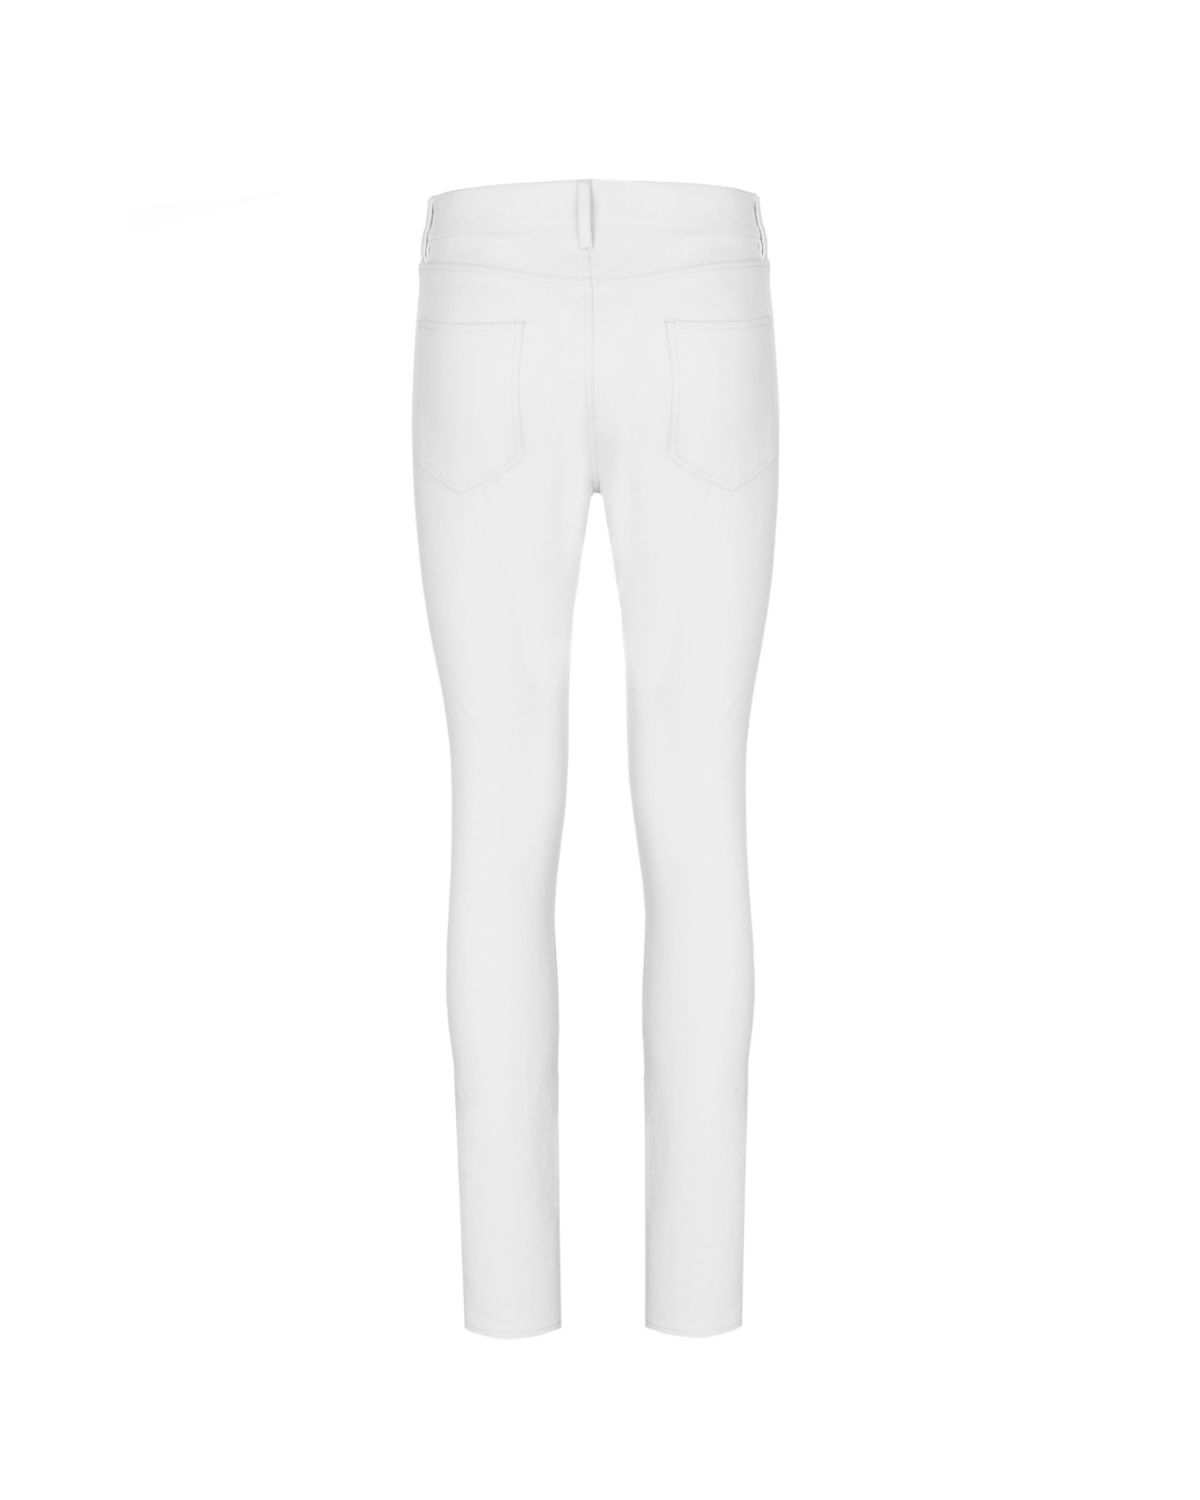 White stretch high-rise pants with ankle slits | Sale, -40% | Genny